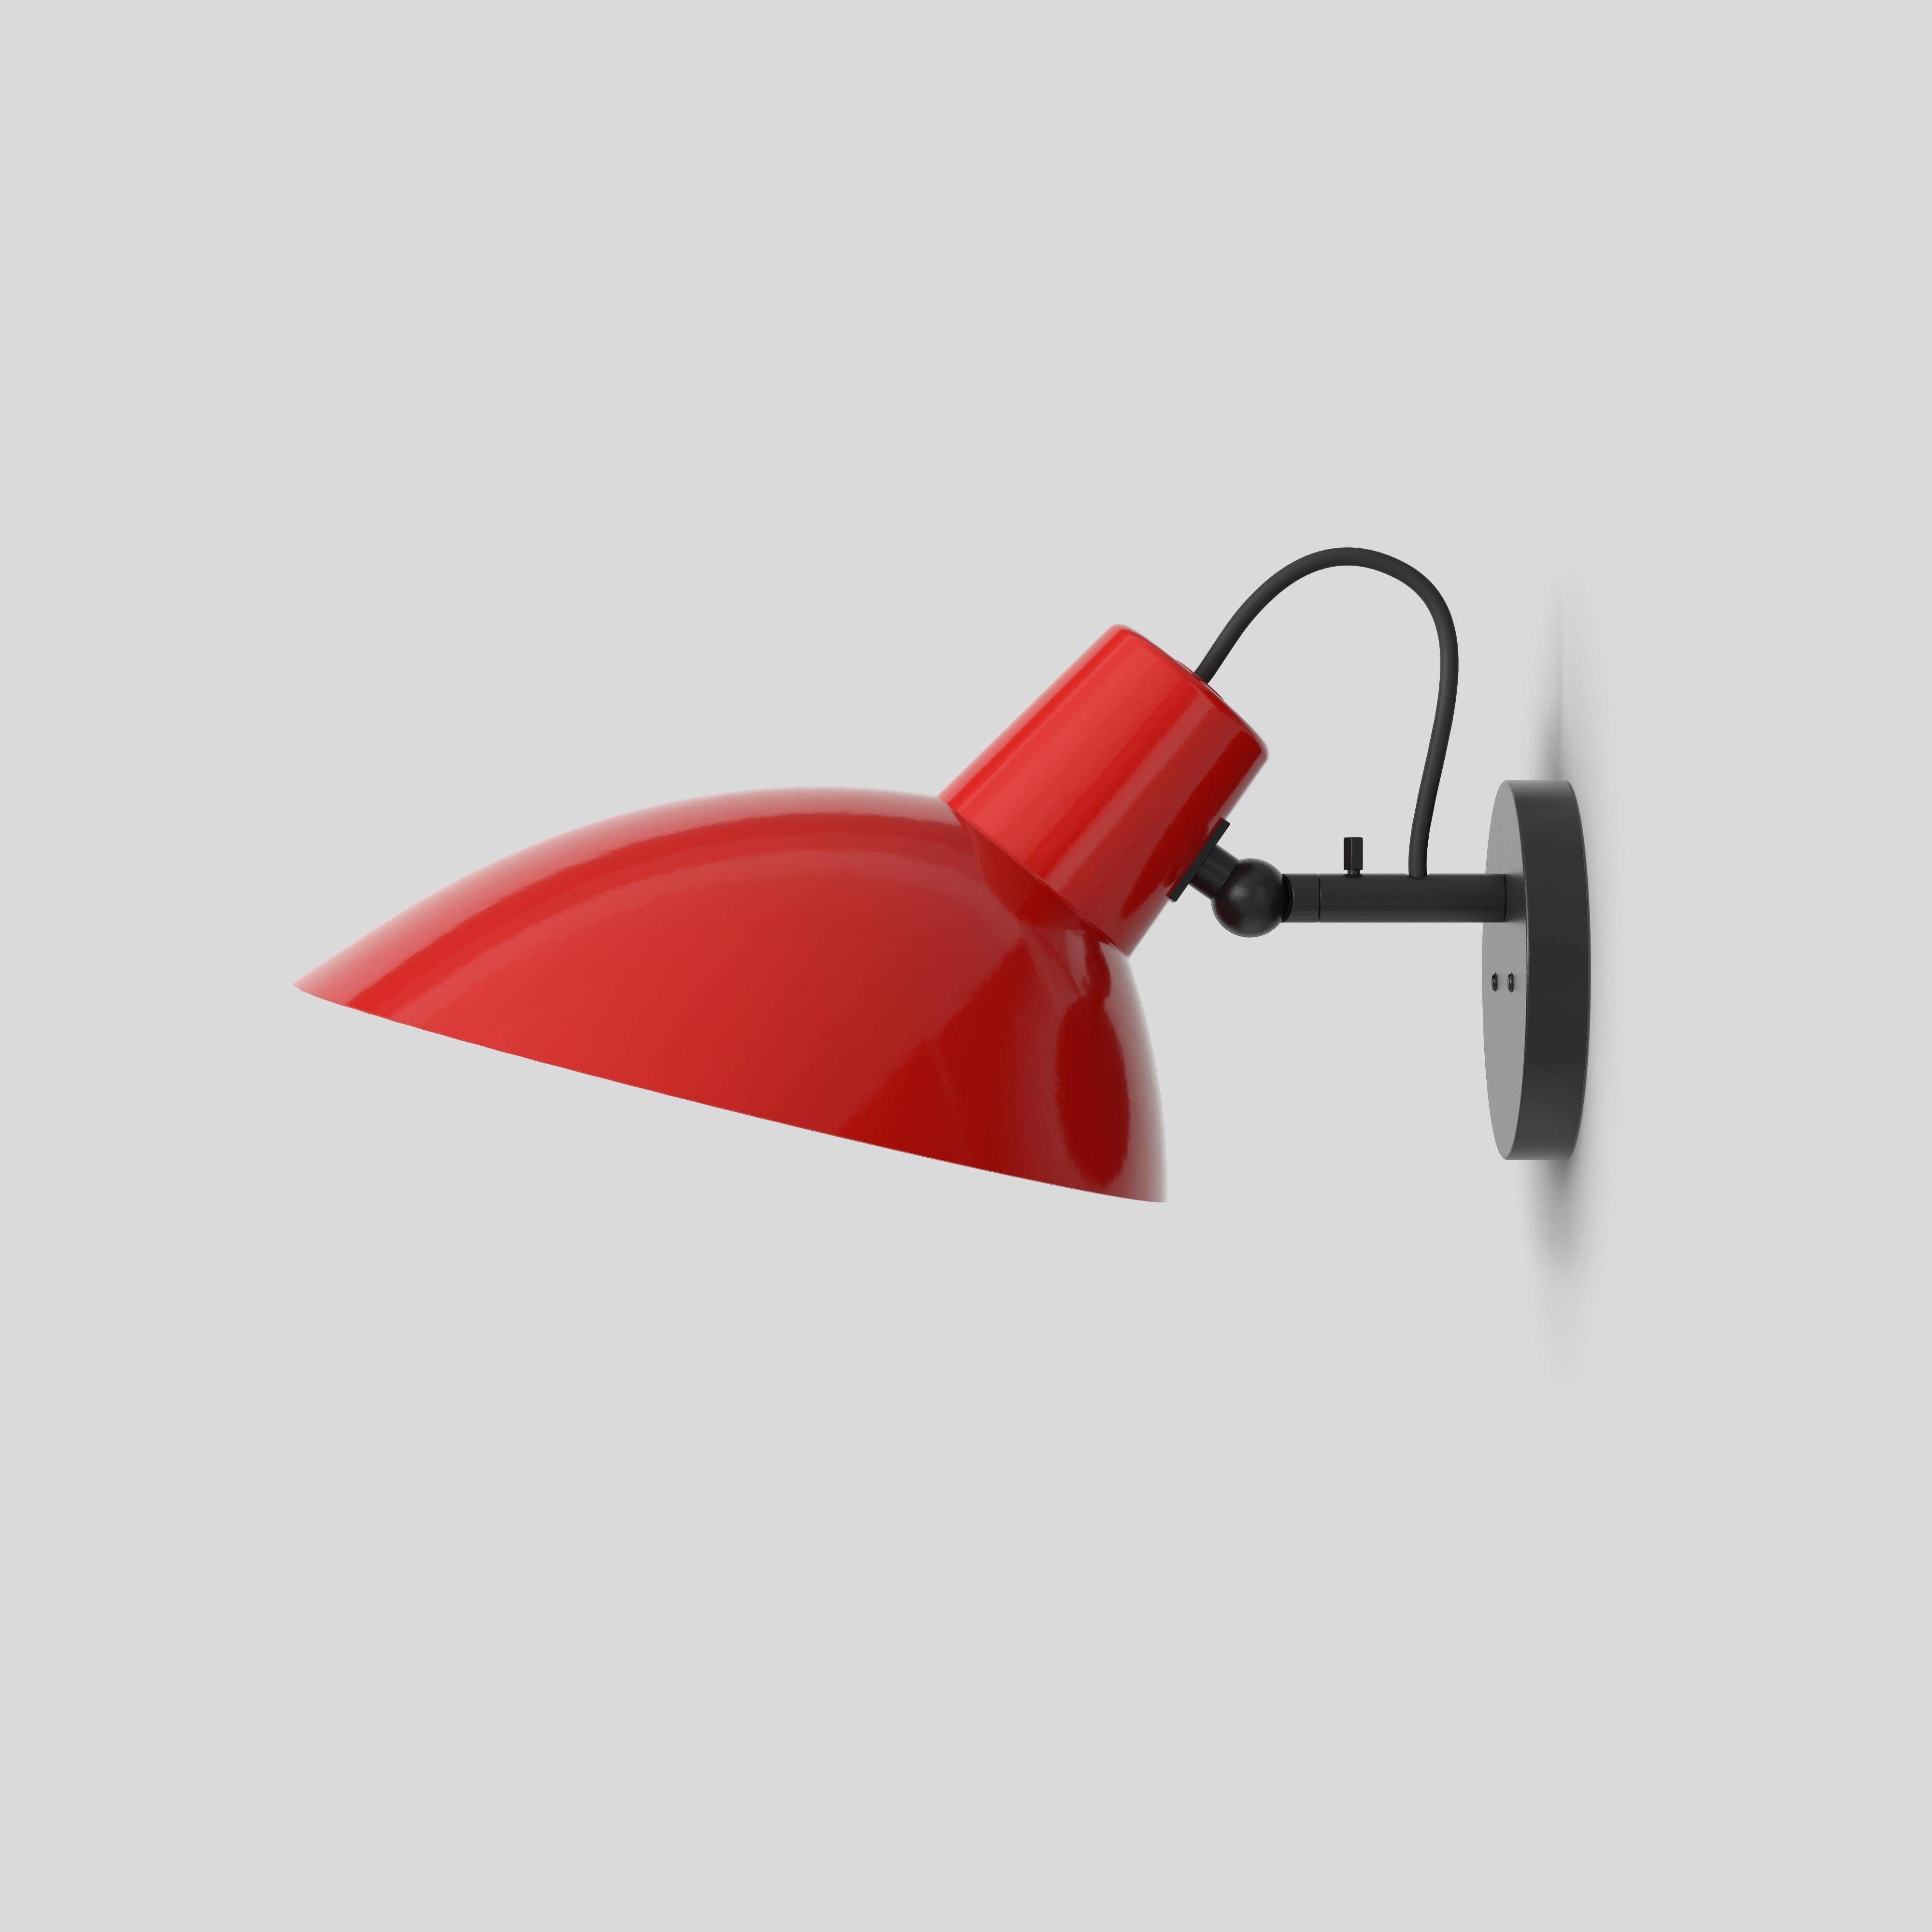 VV Cinquanta wall lamp
Design by Vittoriano Viganò
This version is with red lacquered reflector and black mount.

The VV Cinquanta features an elegant and versatile posable direct light source that can swivel and tilt. The Wall model is mounted on a